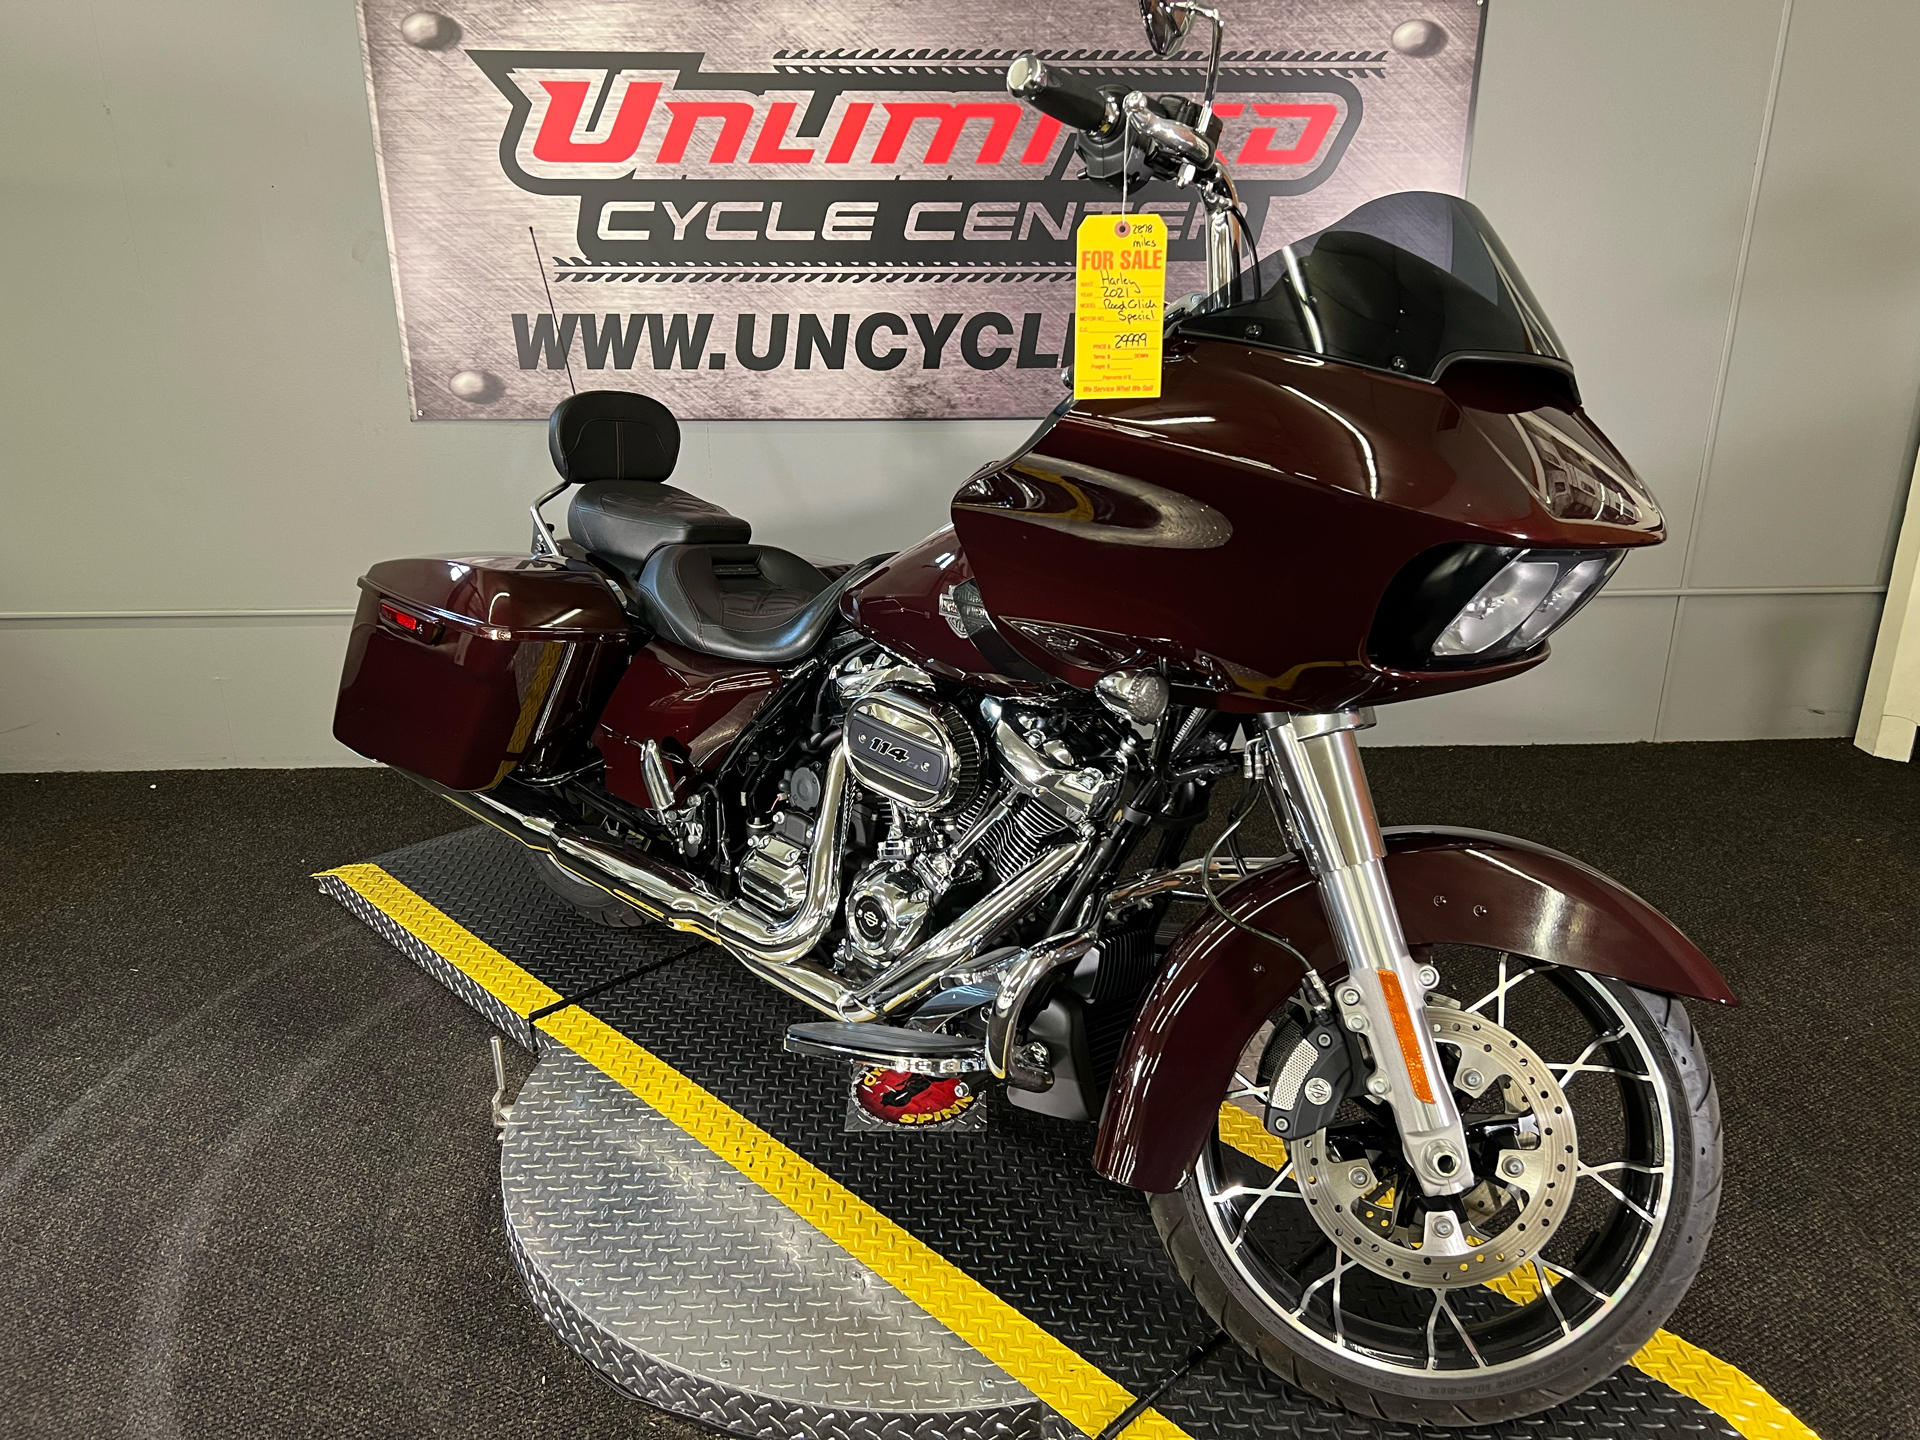 2021 Harley-Davidson Road Glide® Special in Tyrone, Pennsylvania - Photo 1